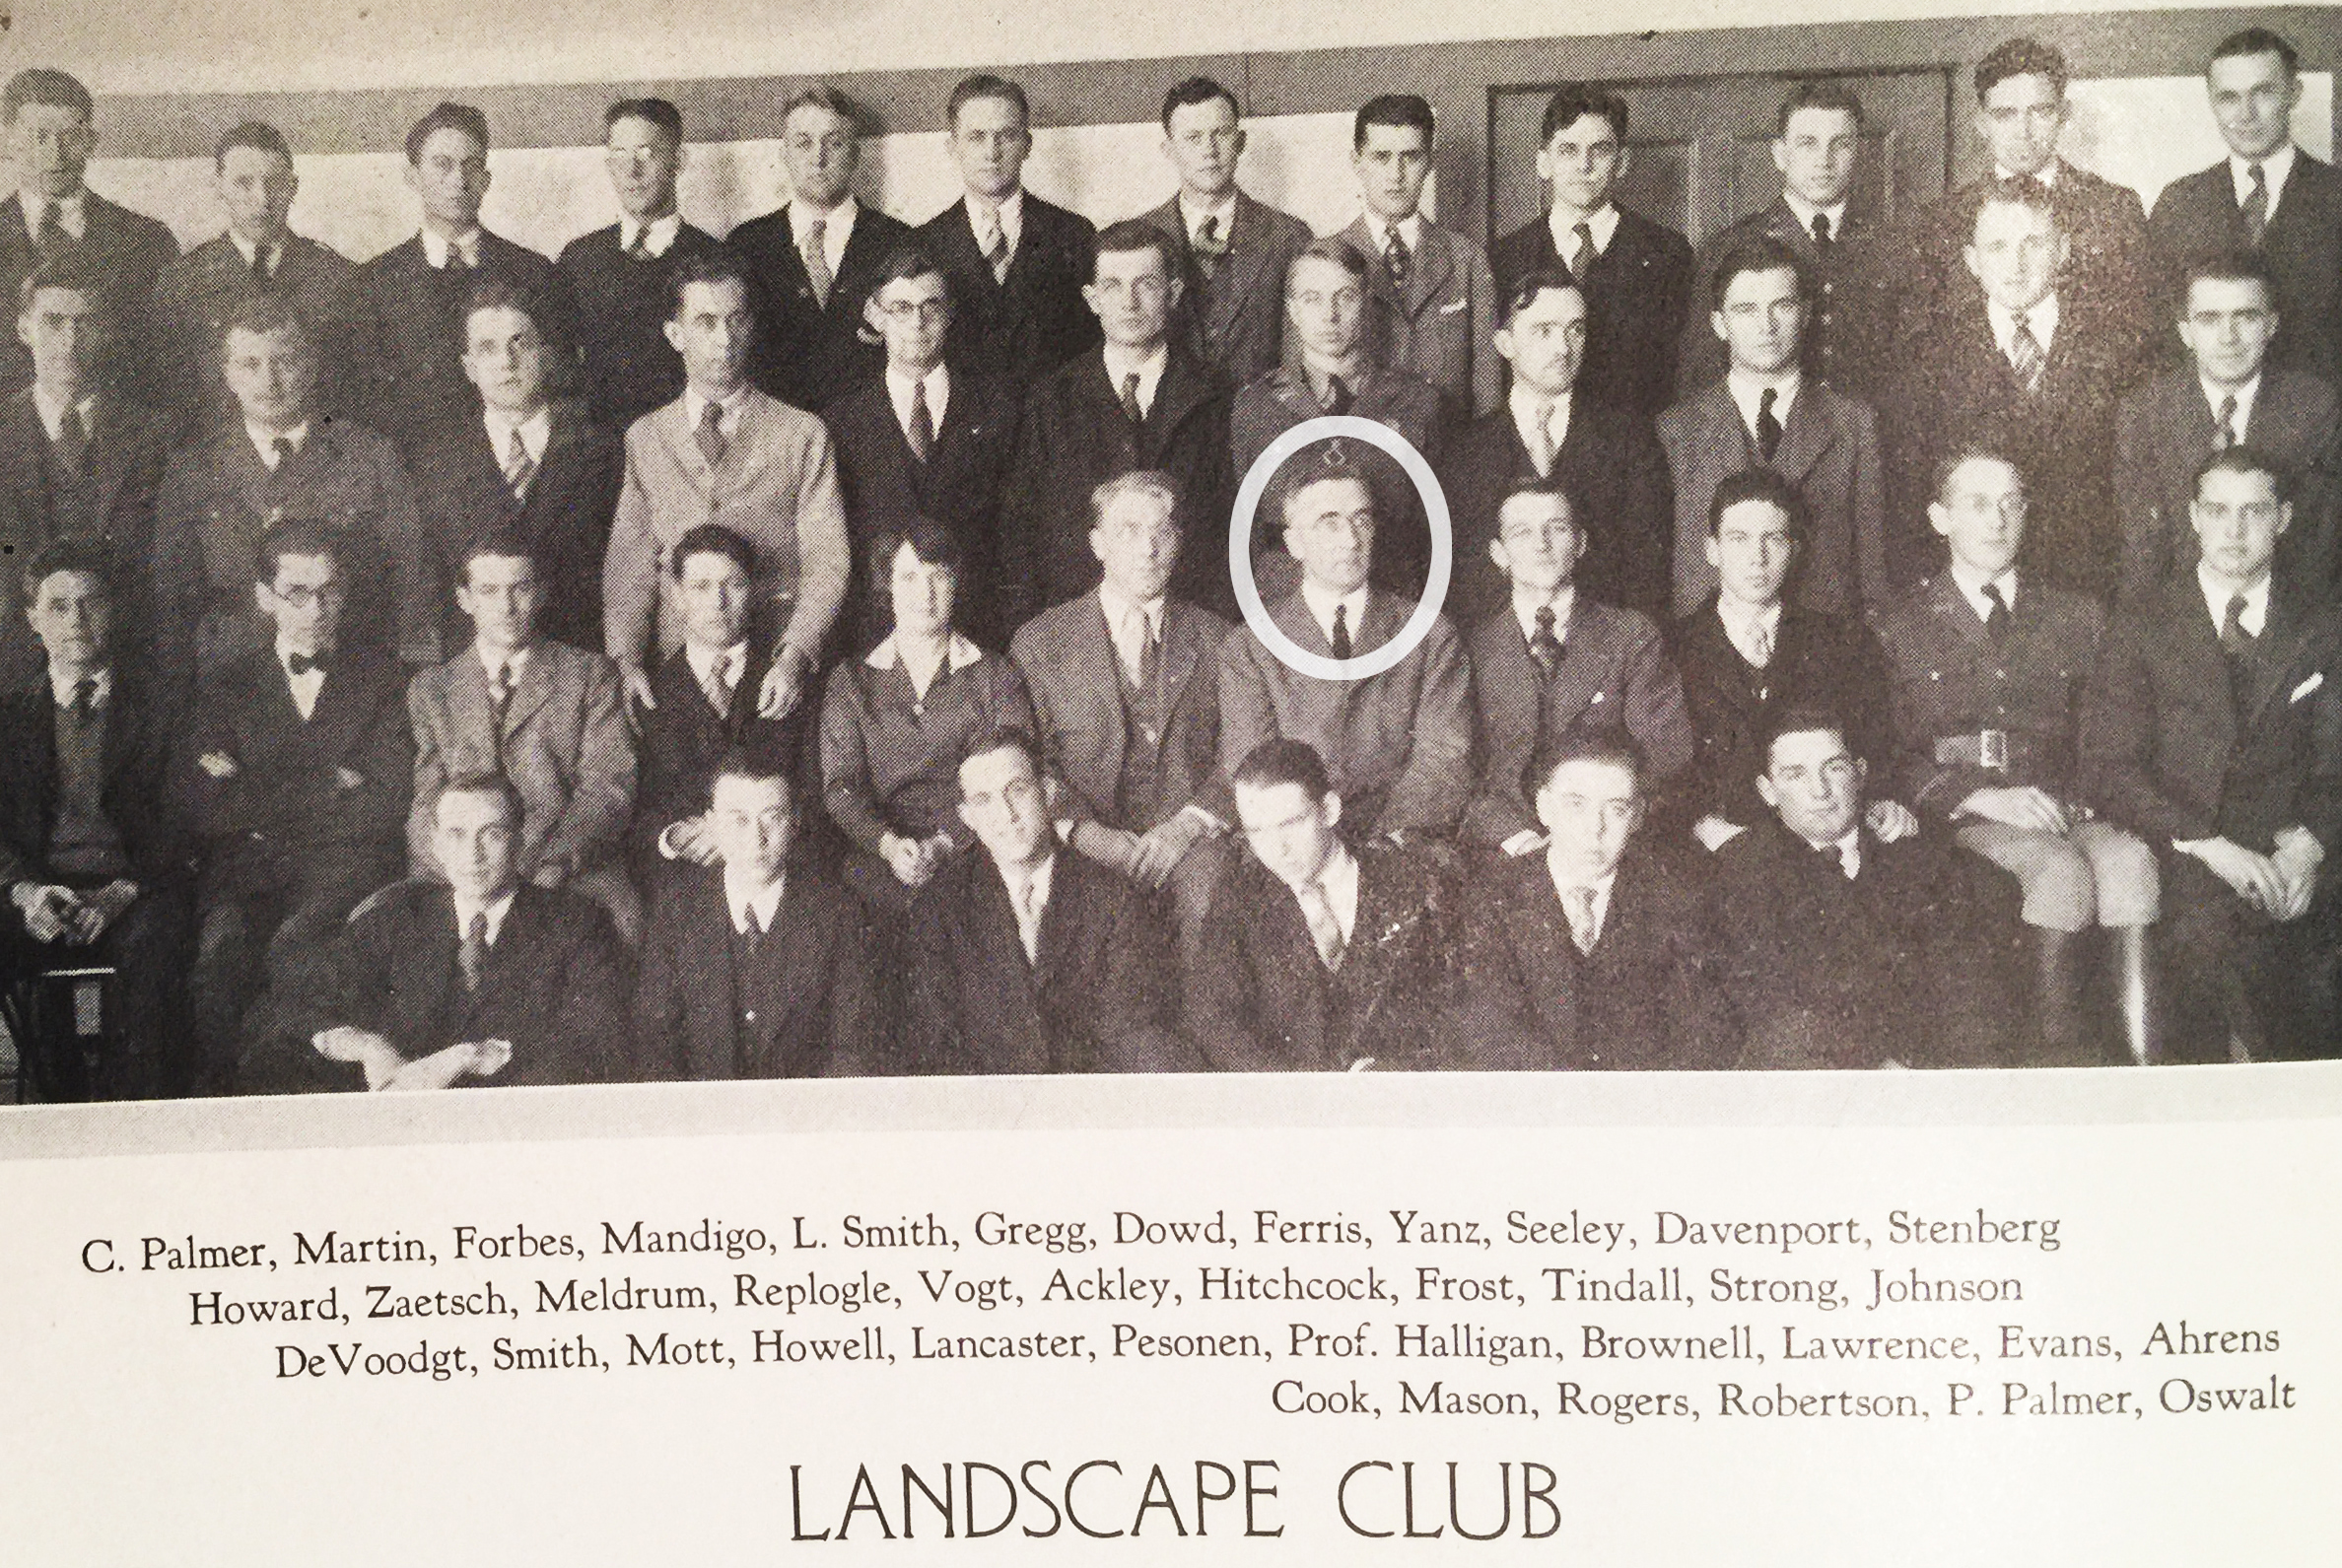 A photograph of the Landscape Architecture Club including Professor Charles Halligan circled in white.